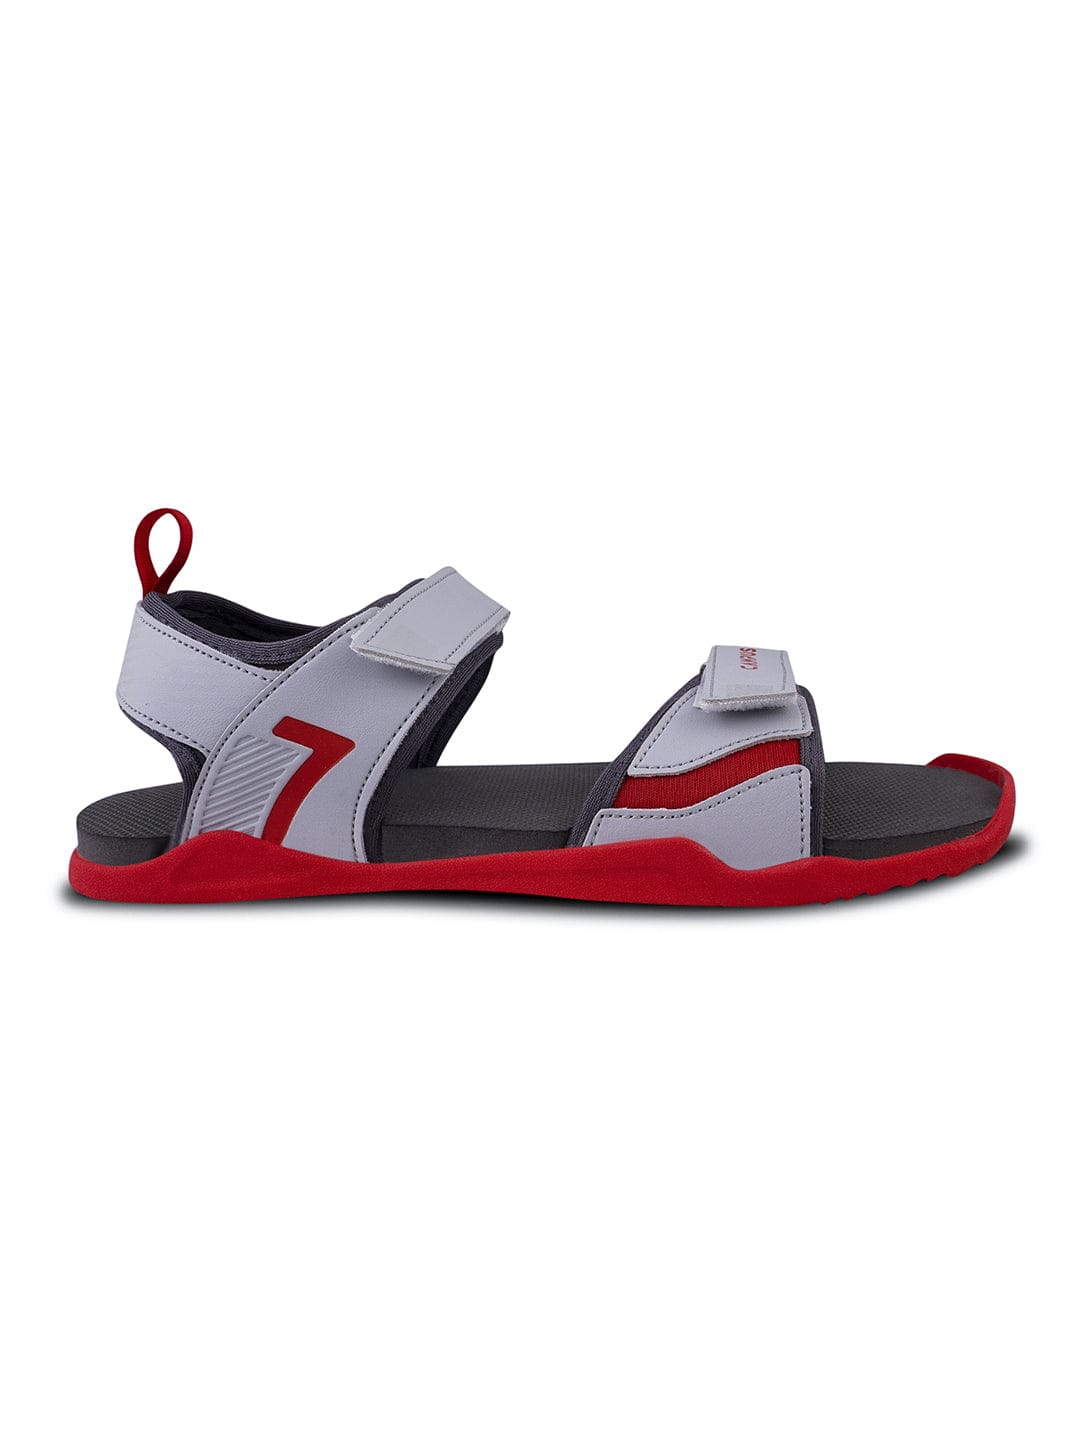 adidas EW2279 Men's Outdoor Fassar Sandals (Multicolor) in Kakinada at best  price by Turning Point - Justdial